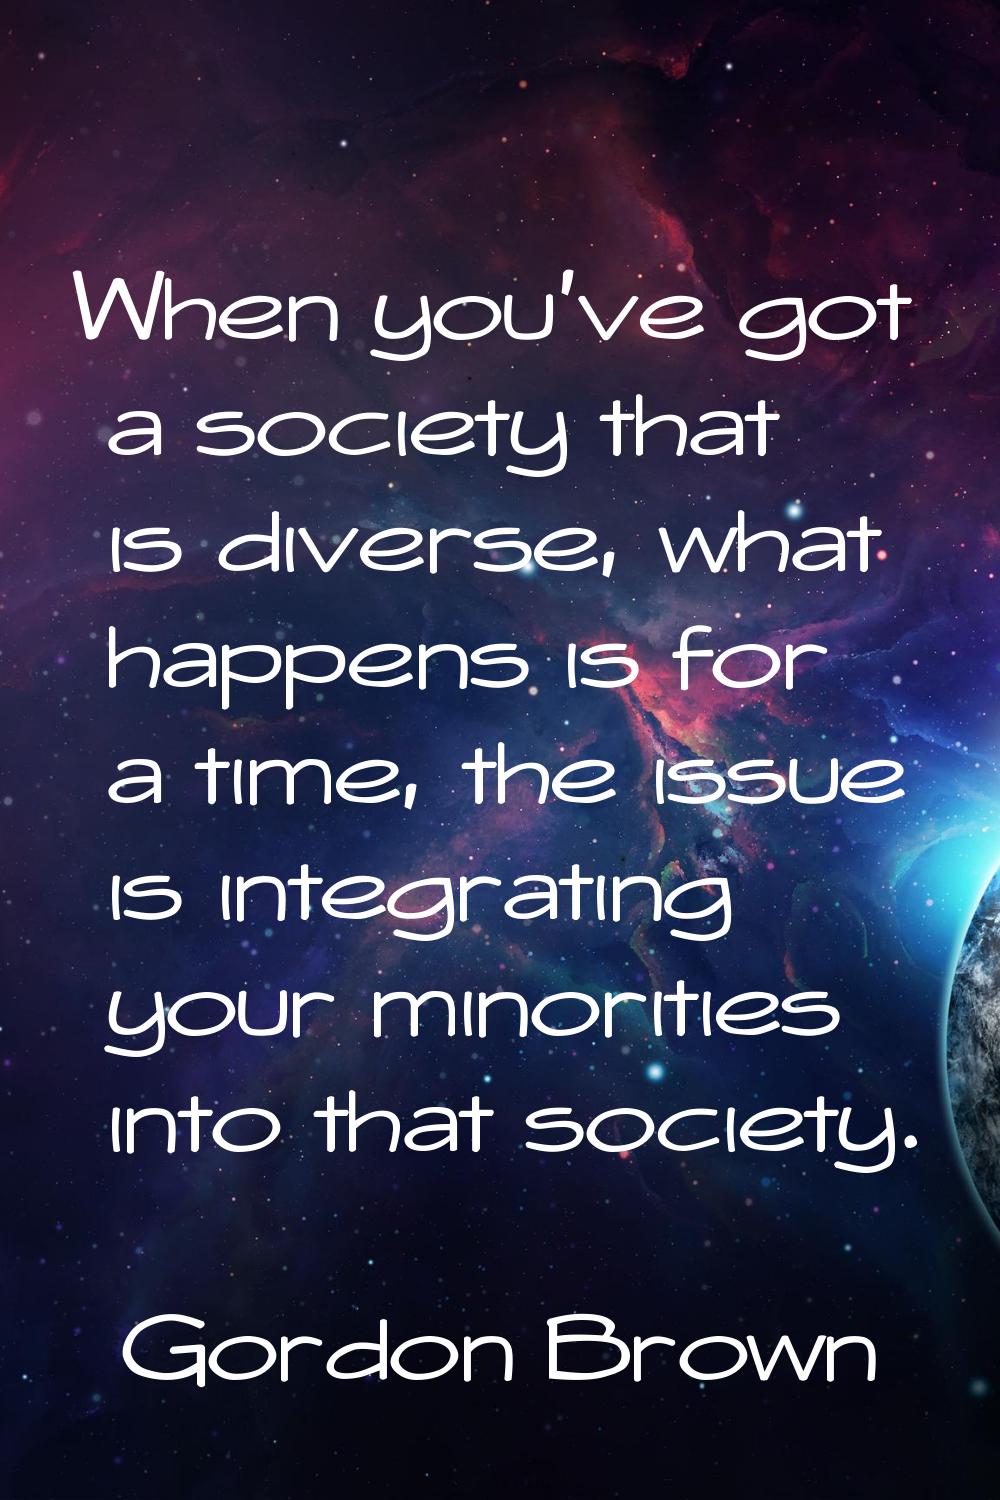 When you've got a society that is diverse, what happens is for a time, the issue is integrating you